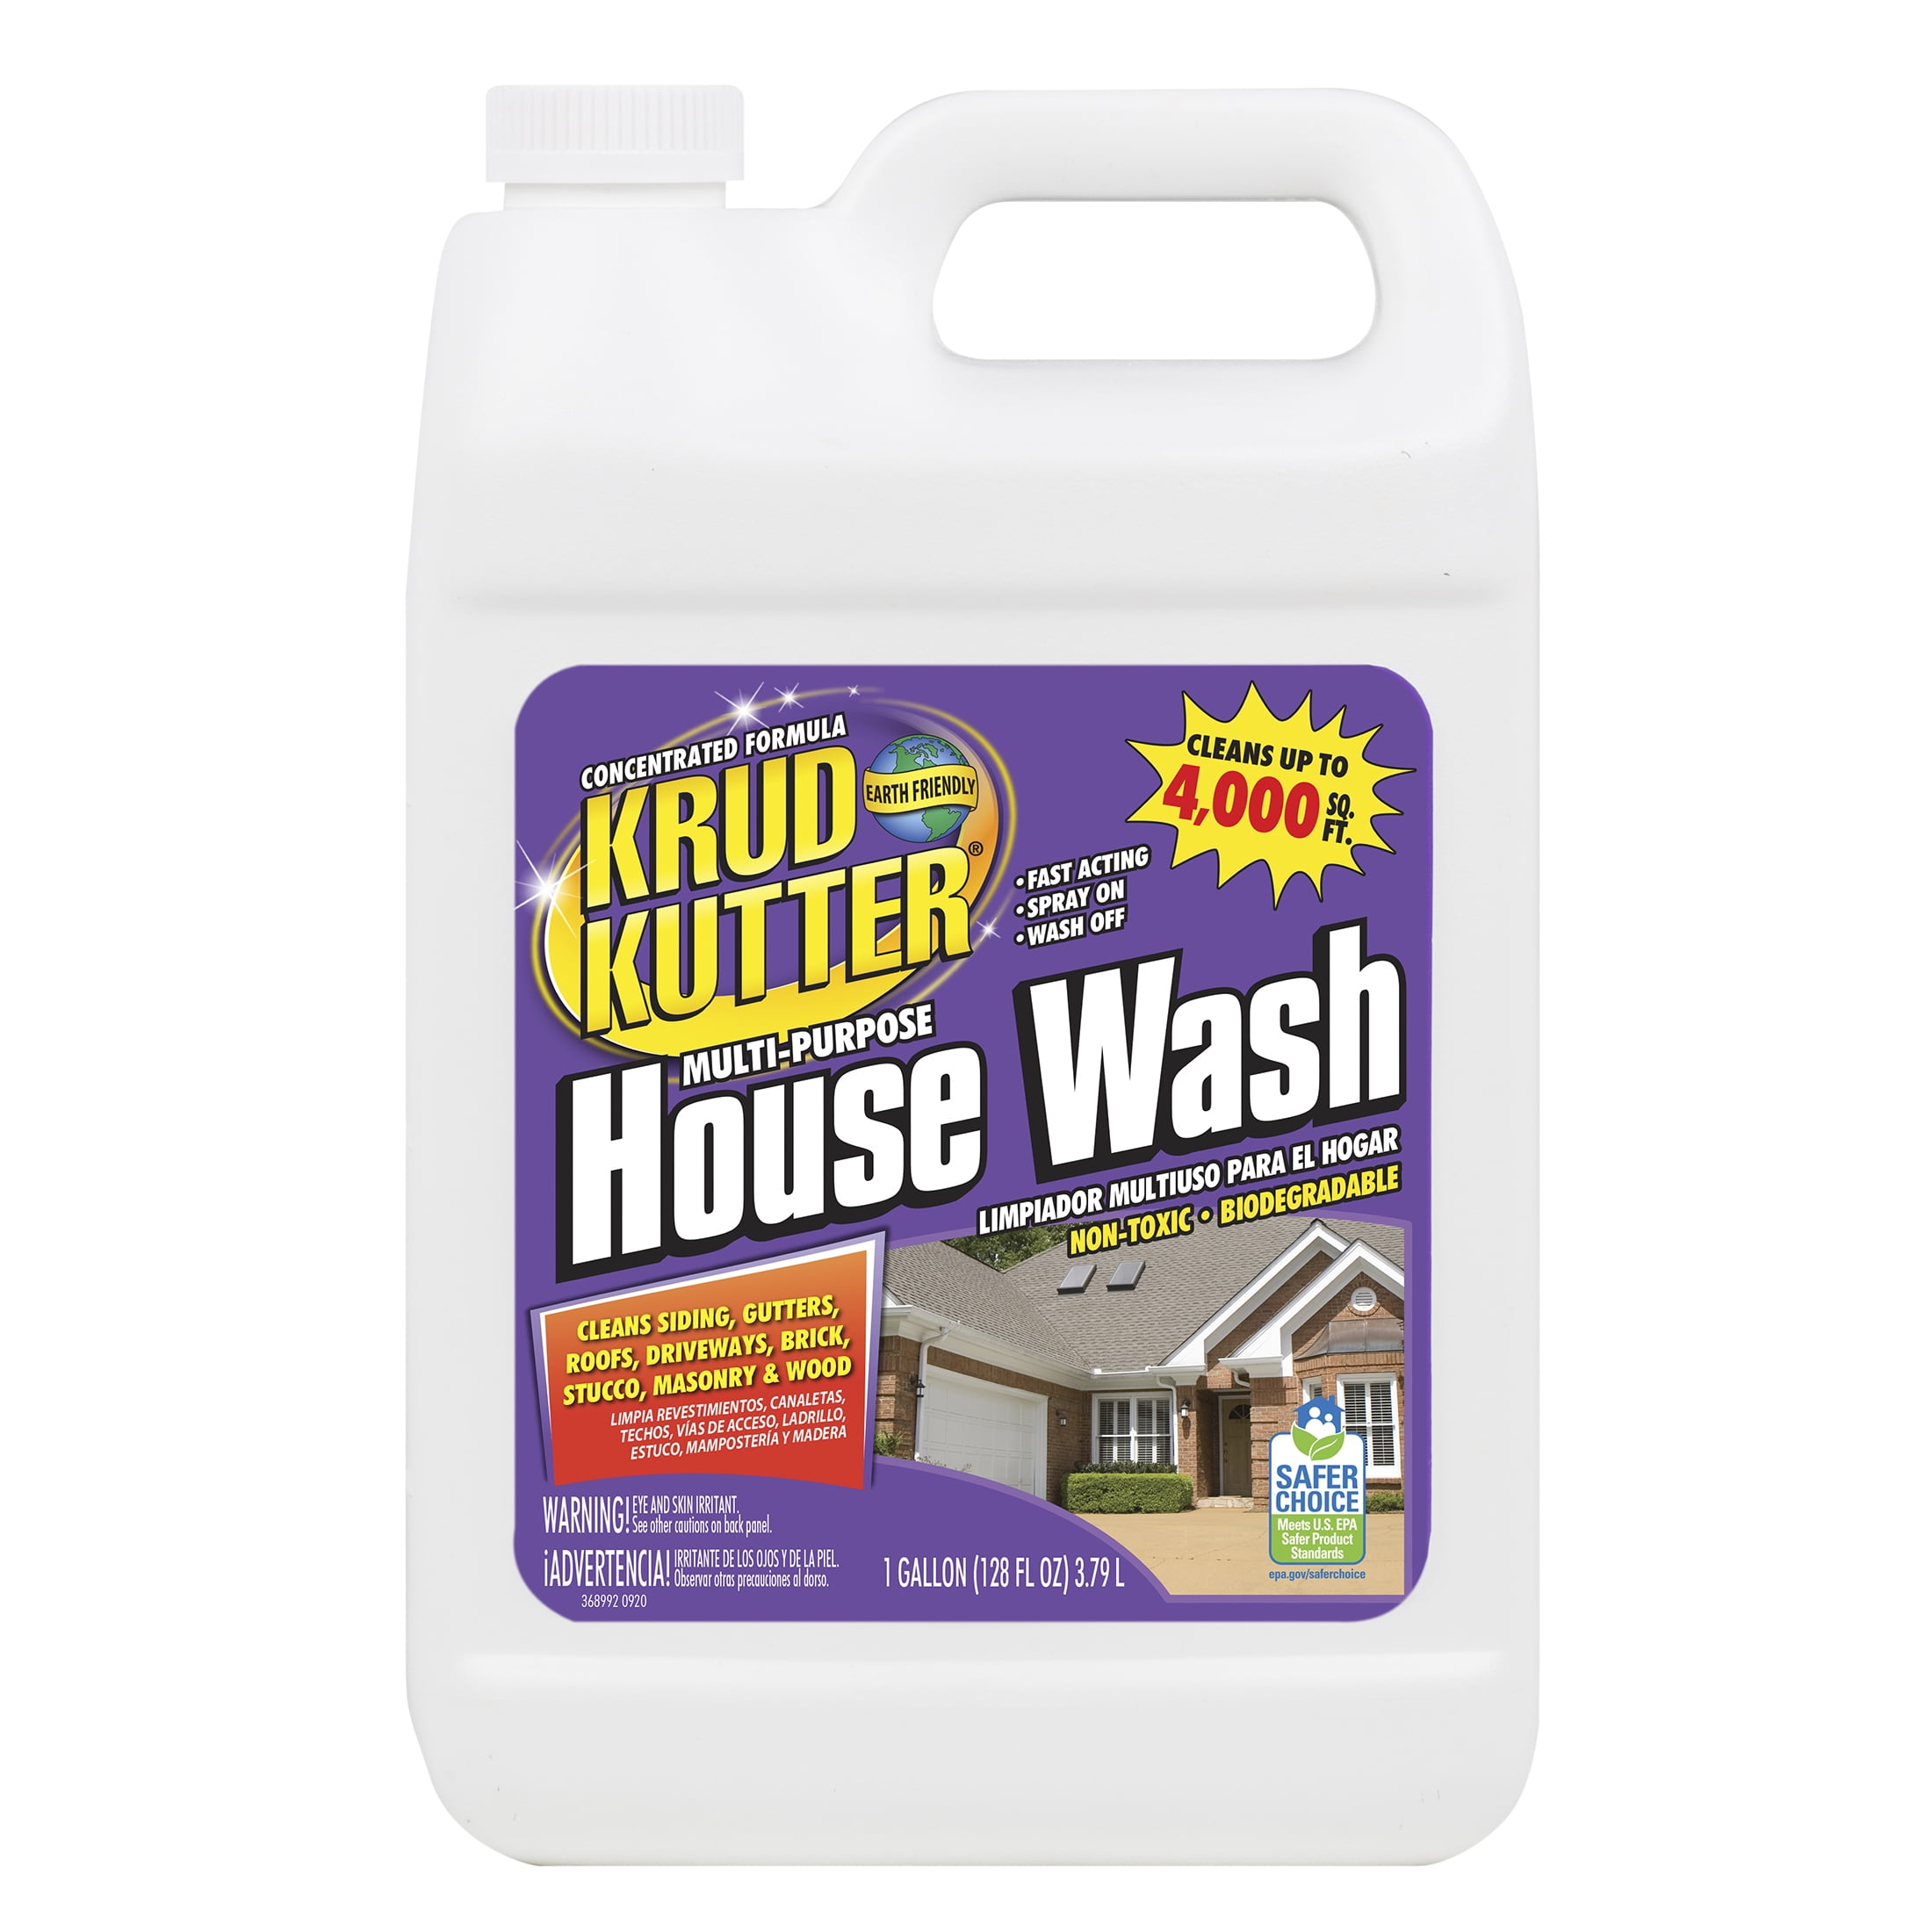 Krud Kutter Multi-Purpose House Wash Cleaner Liquid Concentrate-HW012, 1 Gallon